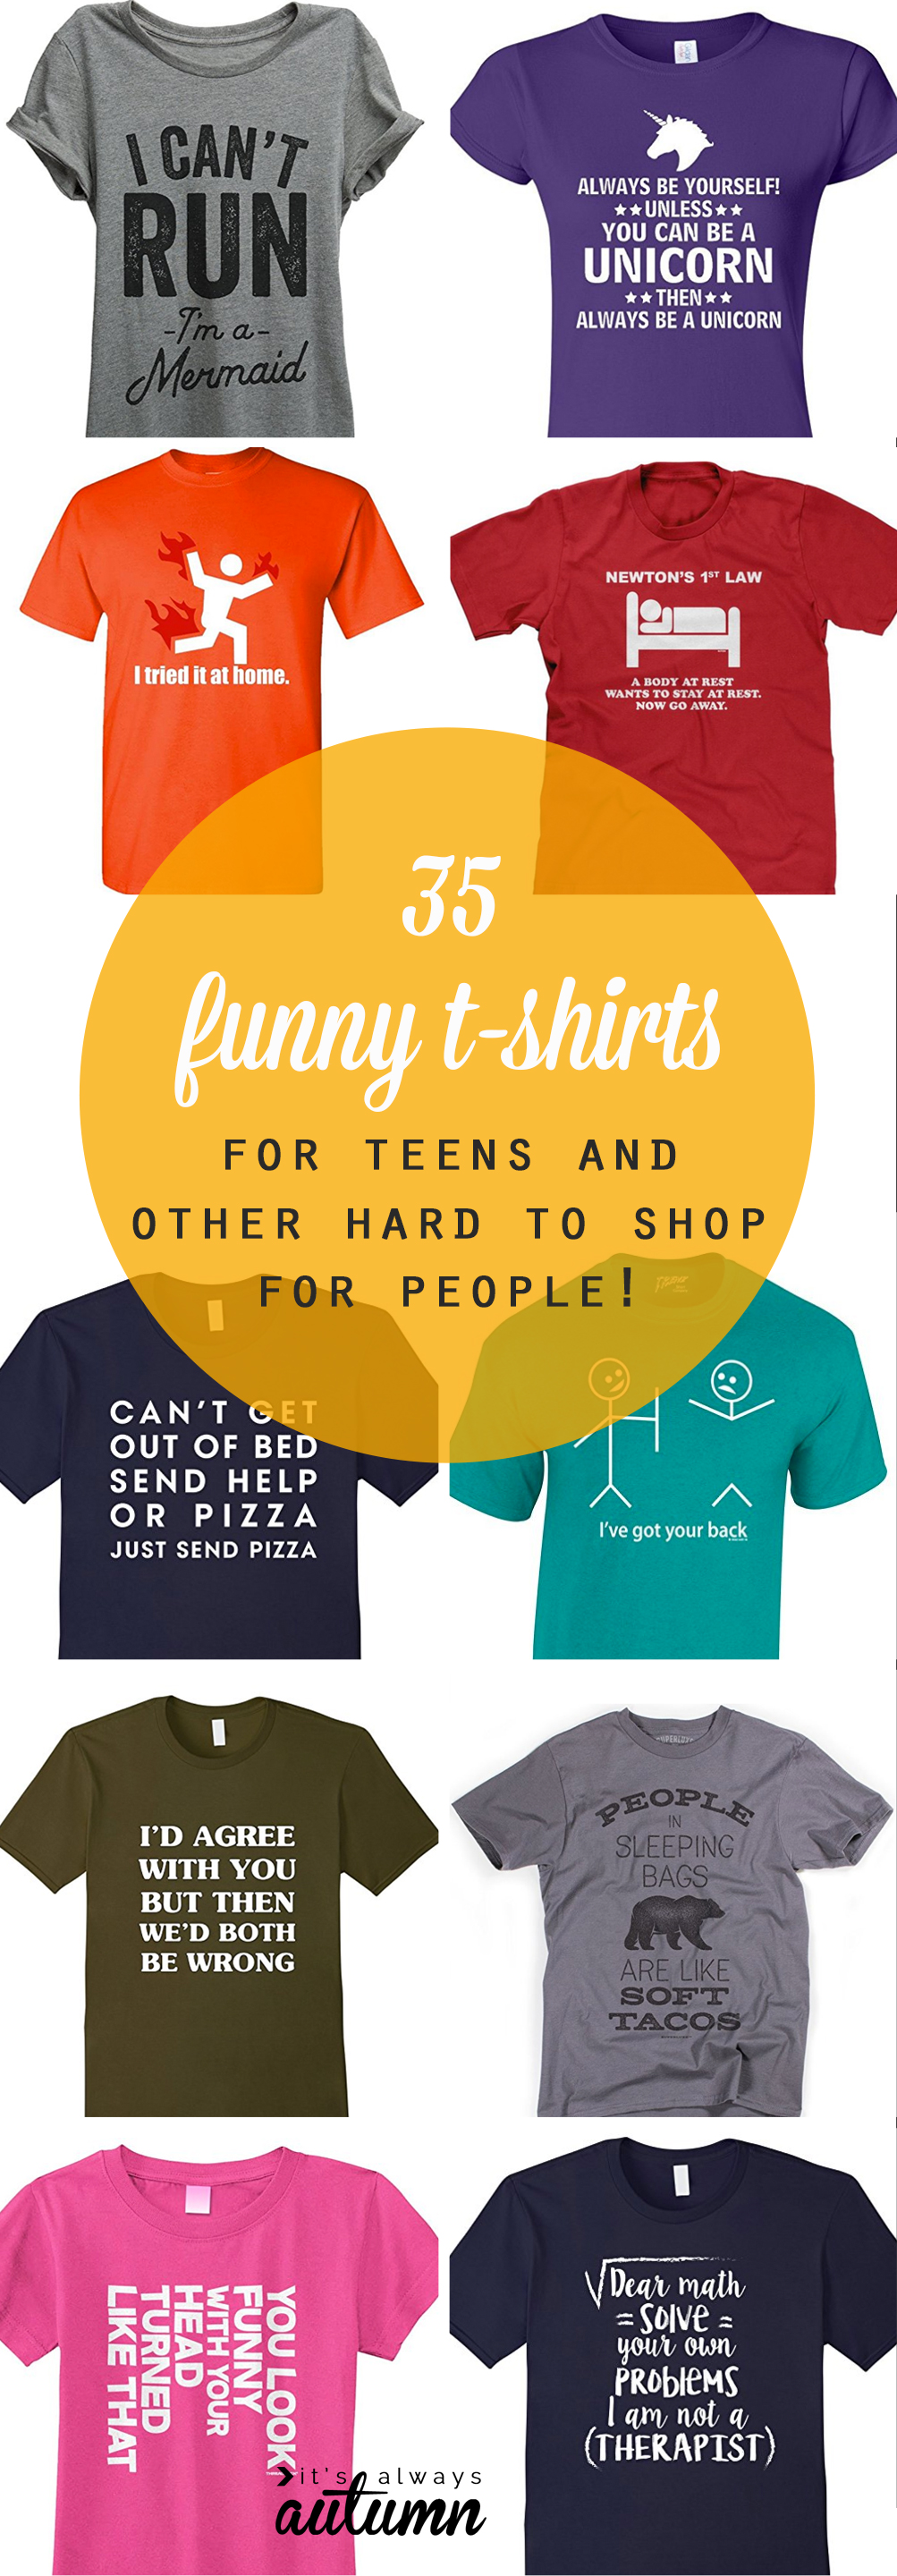 Funny and Fashionable T-shirts Teens Will Love That Make Great Gifts